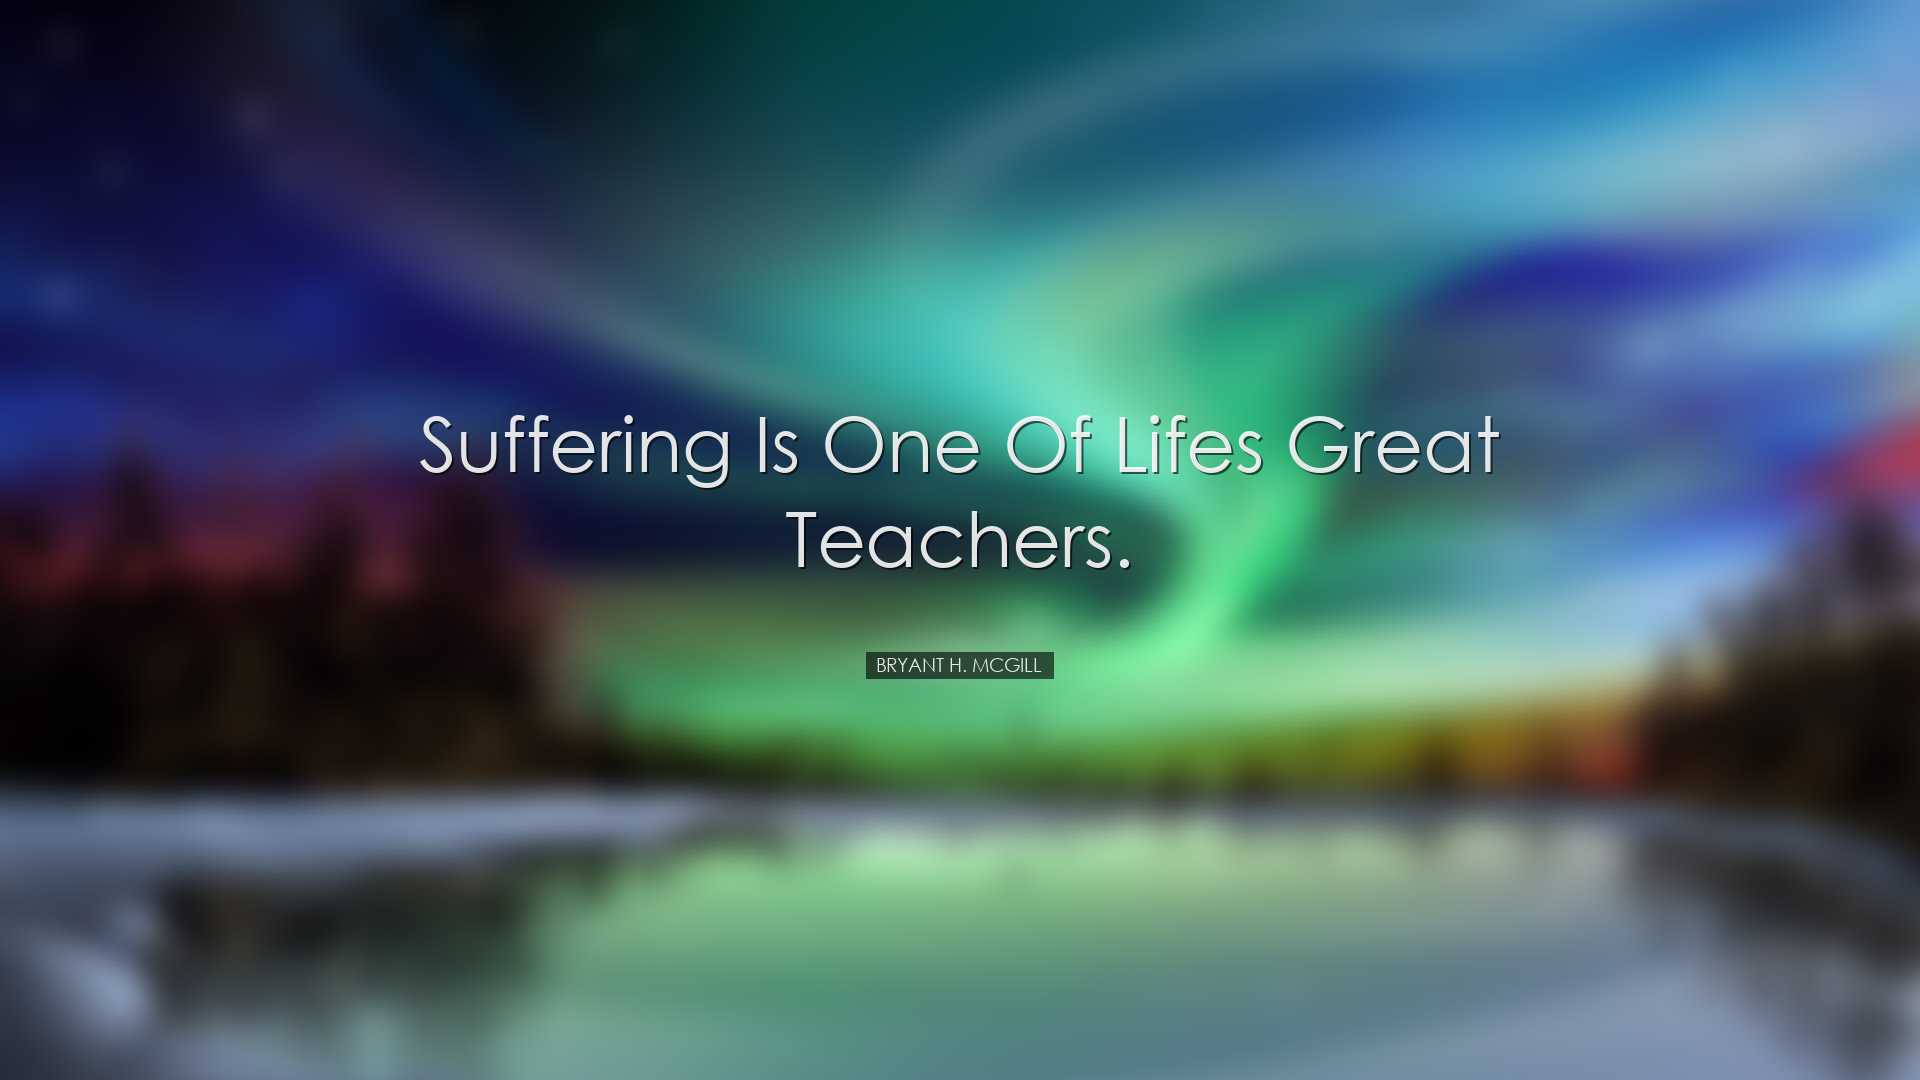 Suffering is one of lifes great teachers. - Bryant H. McGill